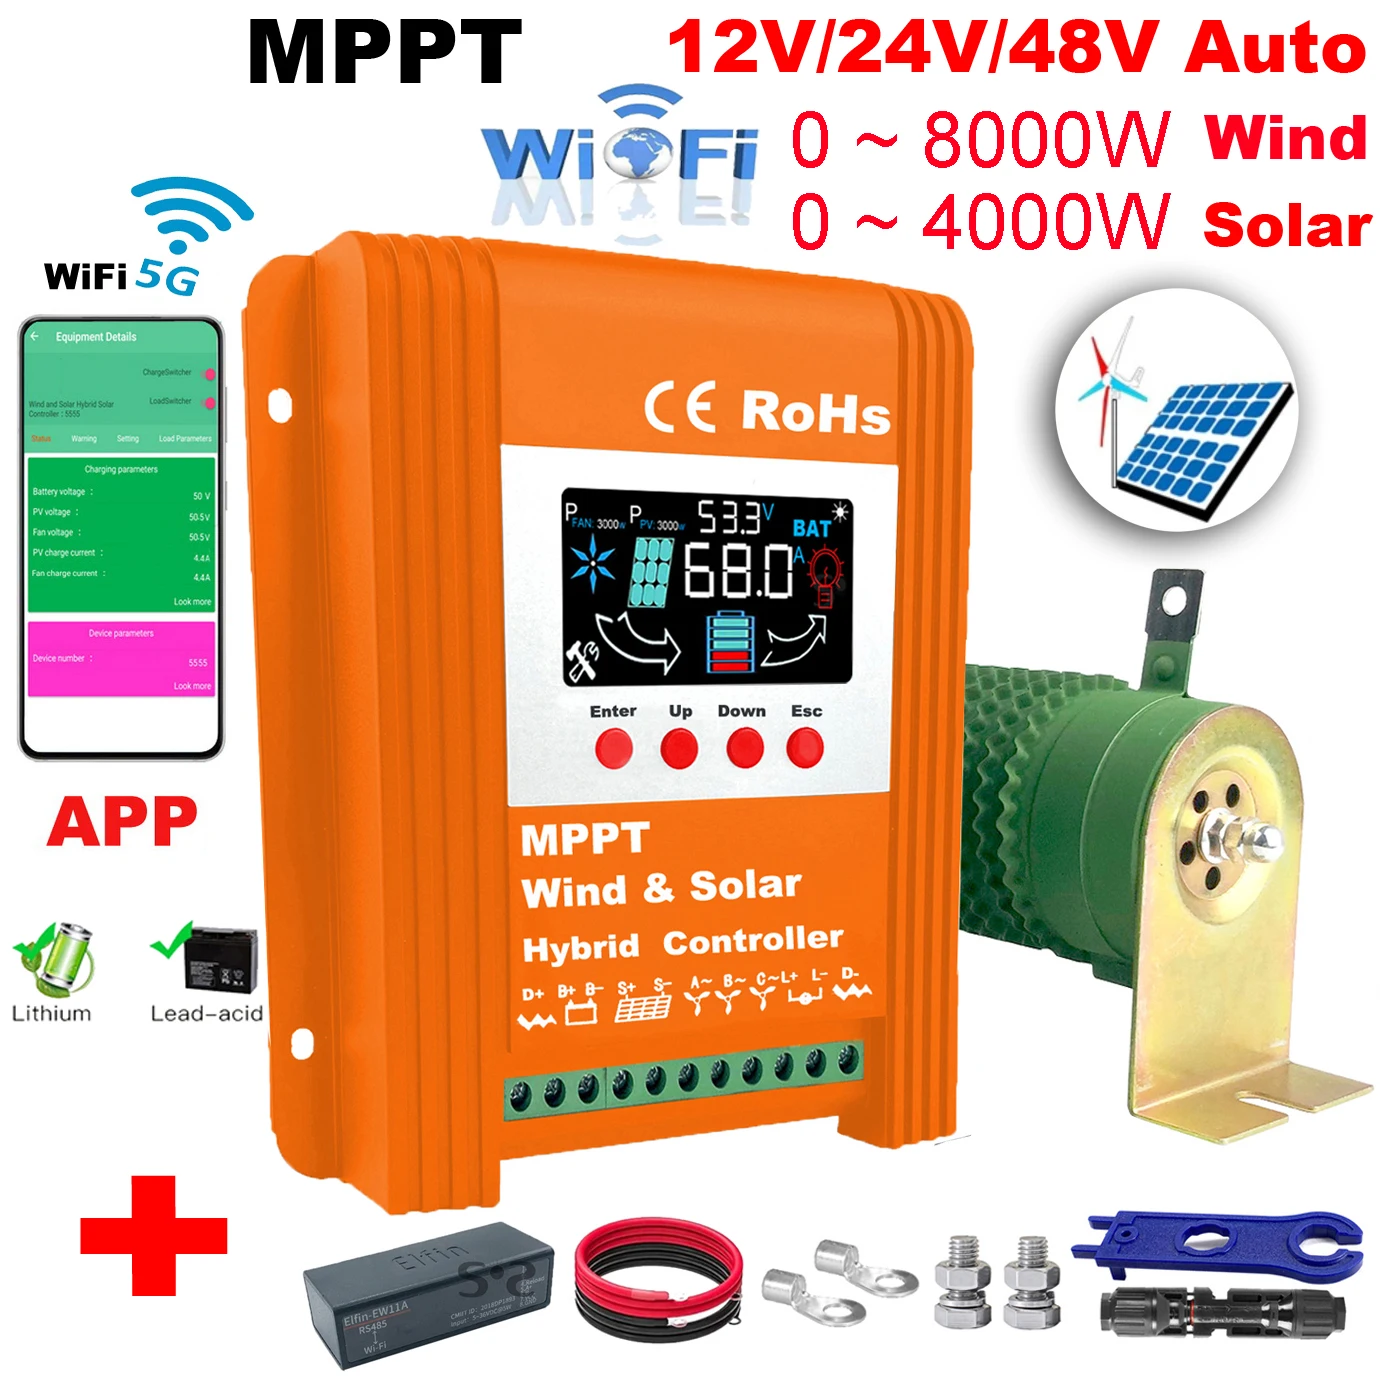 

12V 24V 48V 3KW 5000W 6000W Hybrid Wind Solar Charge Controller MPPT Battery Equalizer 80A 100A Lifepo4 Lithium other Battery